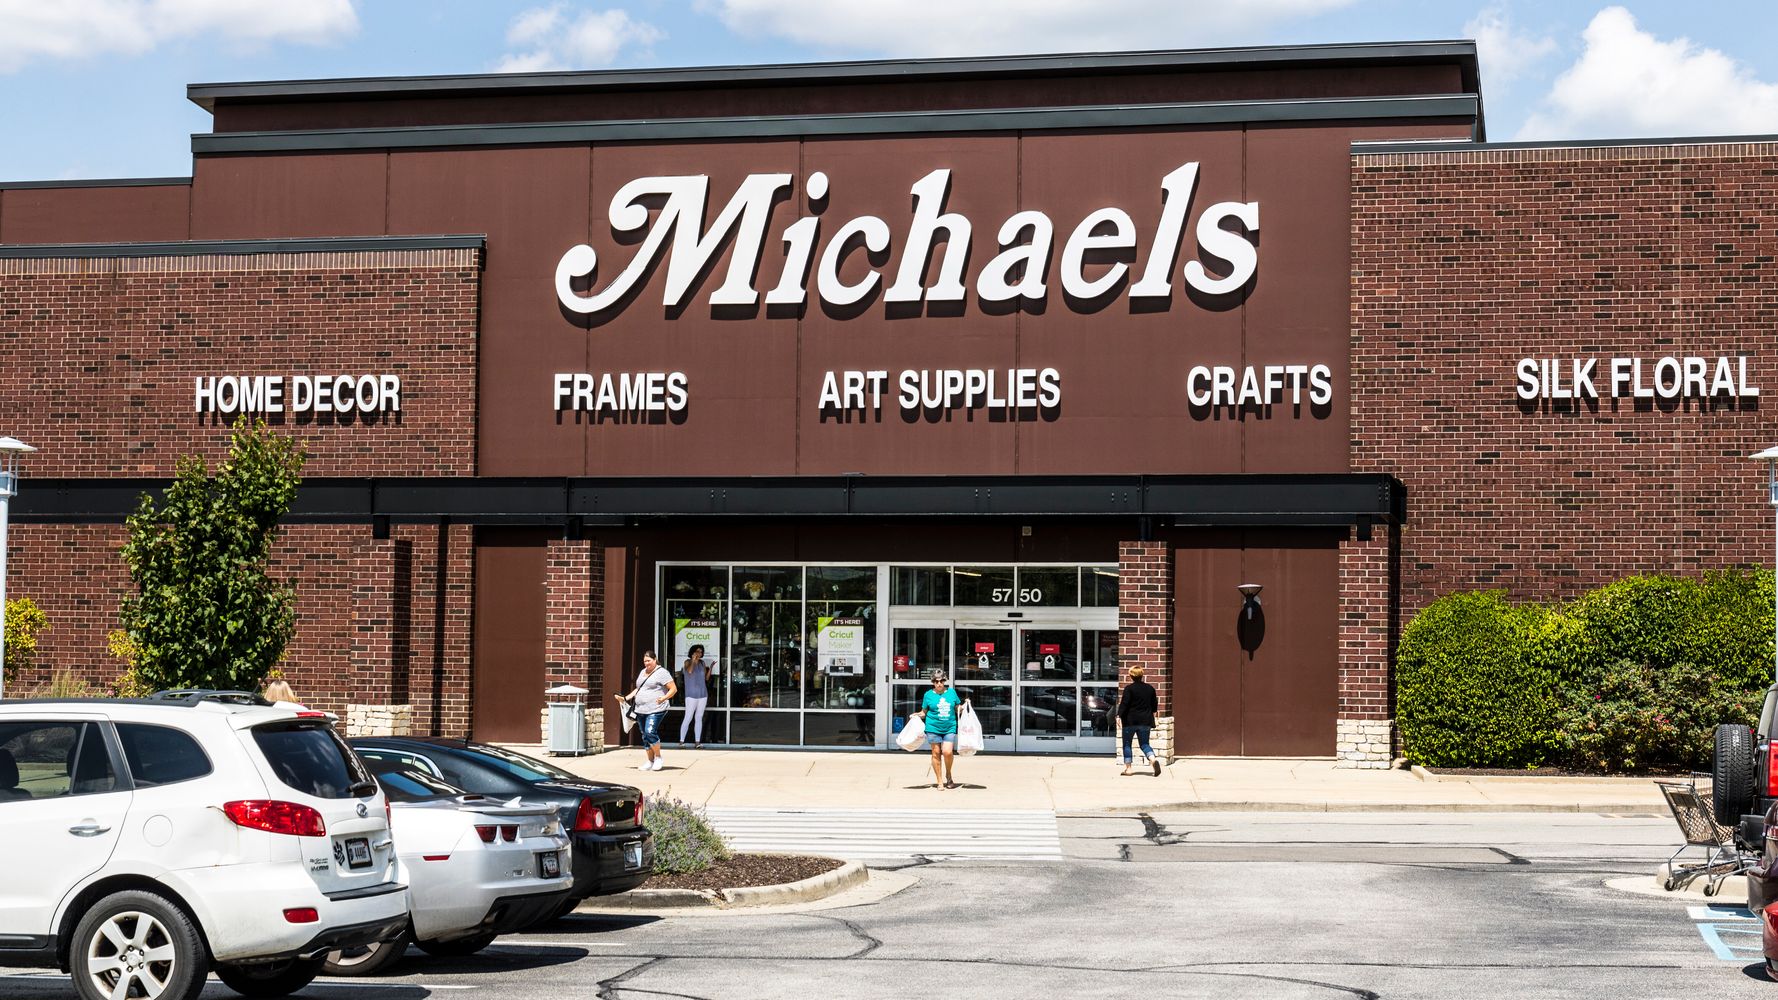 19 Ways to Save More at Michaels